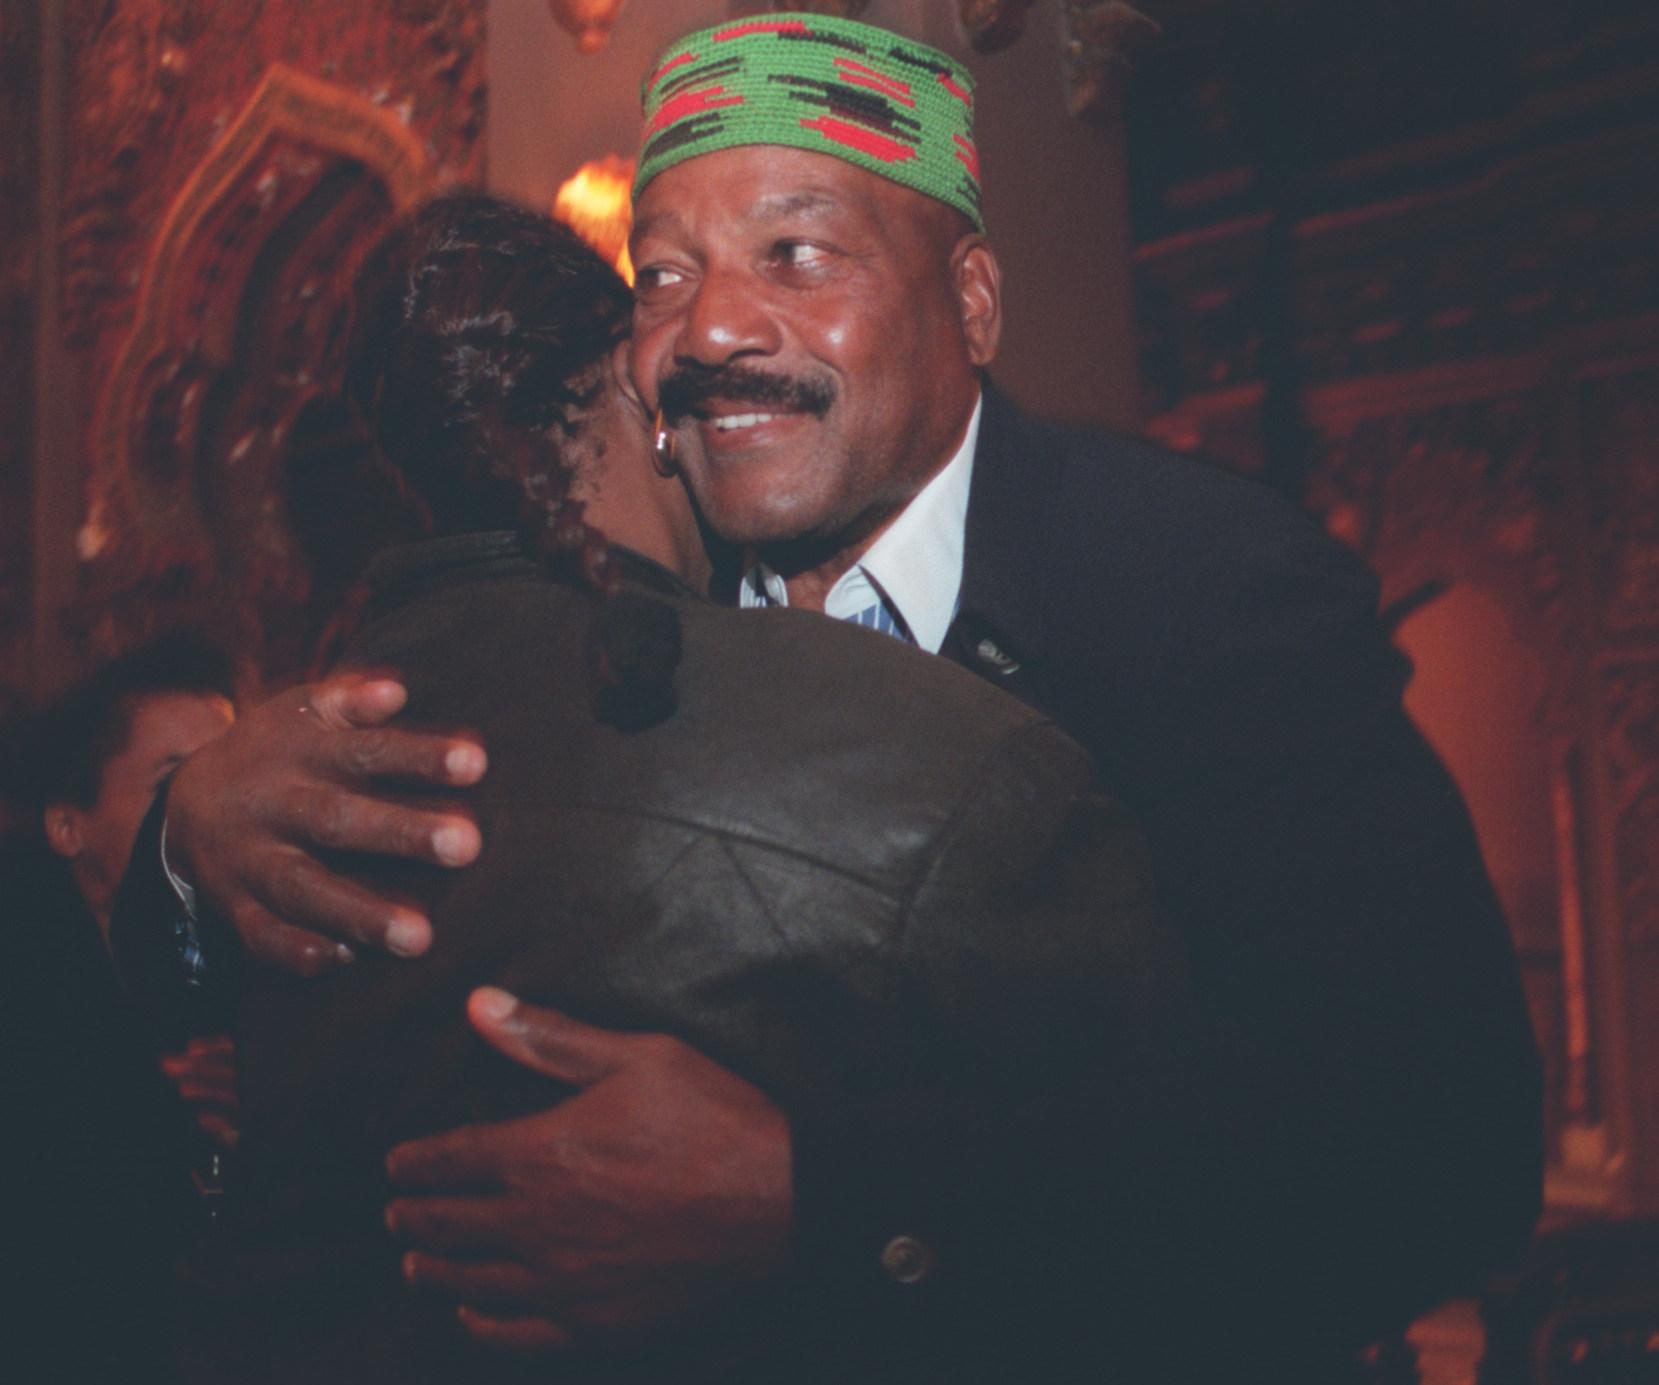 After waiting Diane Scimone of Syracuse gets the hug of her life by idol Jim Brown during a reception for the 1996 Syracuse Walk of Stars at the Landmark Theatre tonight. Said Diane, "I love him. I love his football, I love his movies, I am his number one fan!"